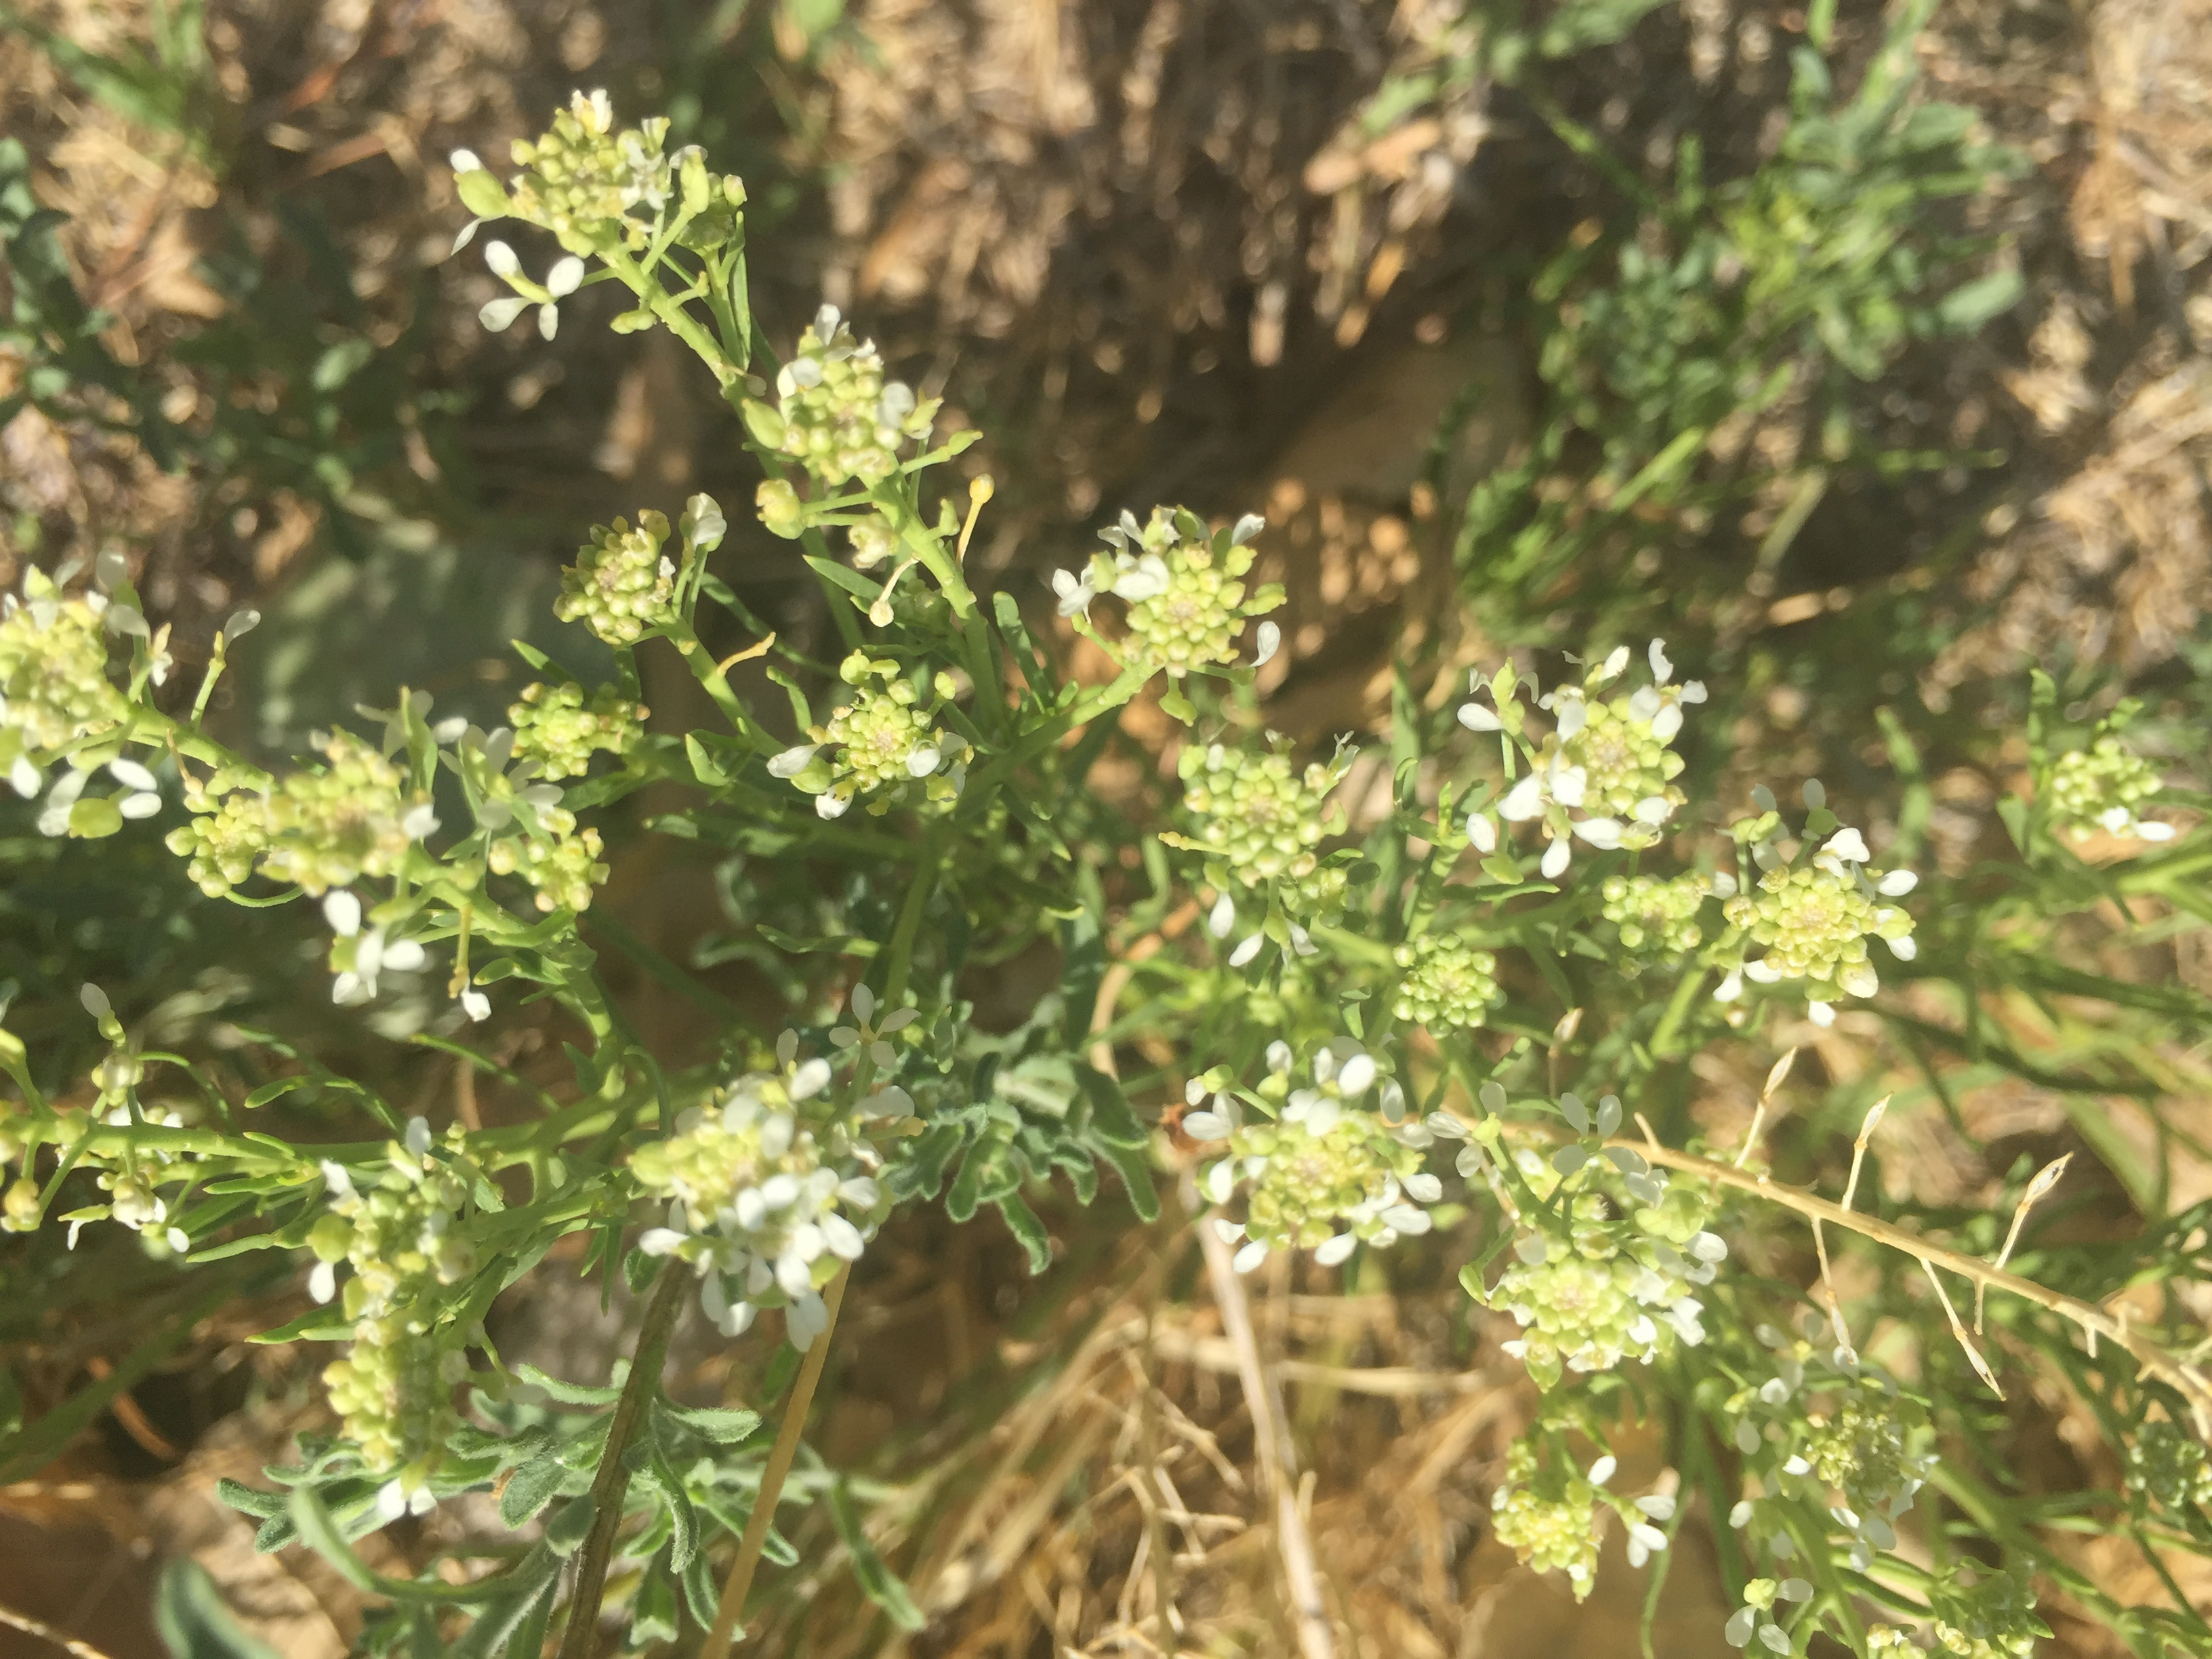 Small leaves and flower clusters with buds and white blooms